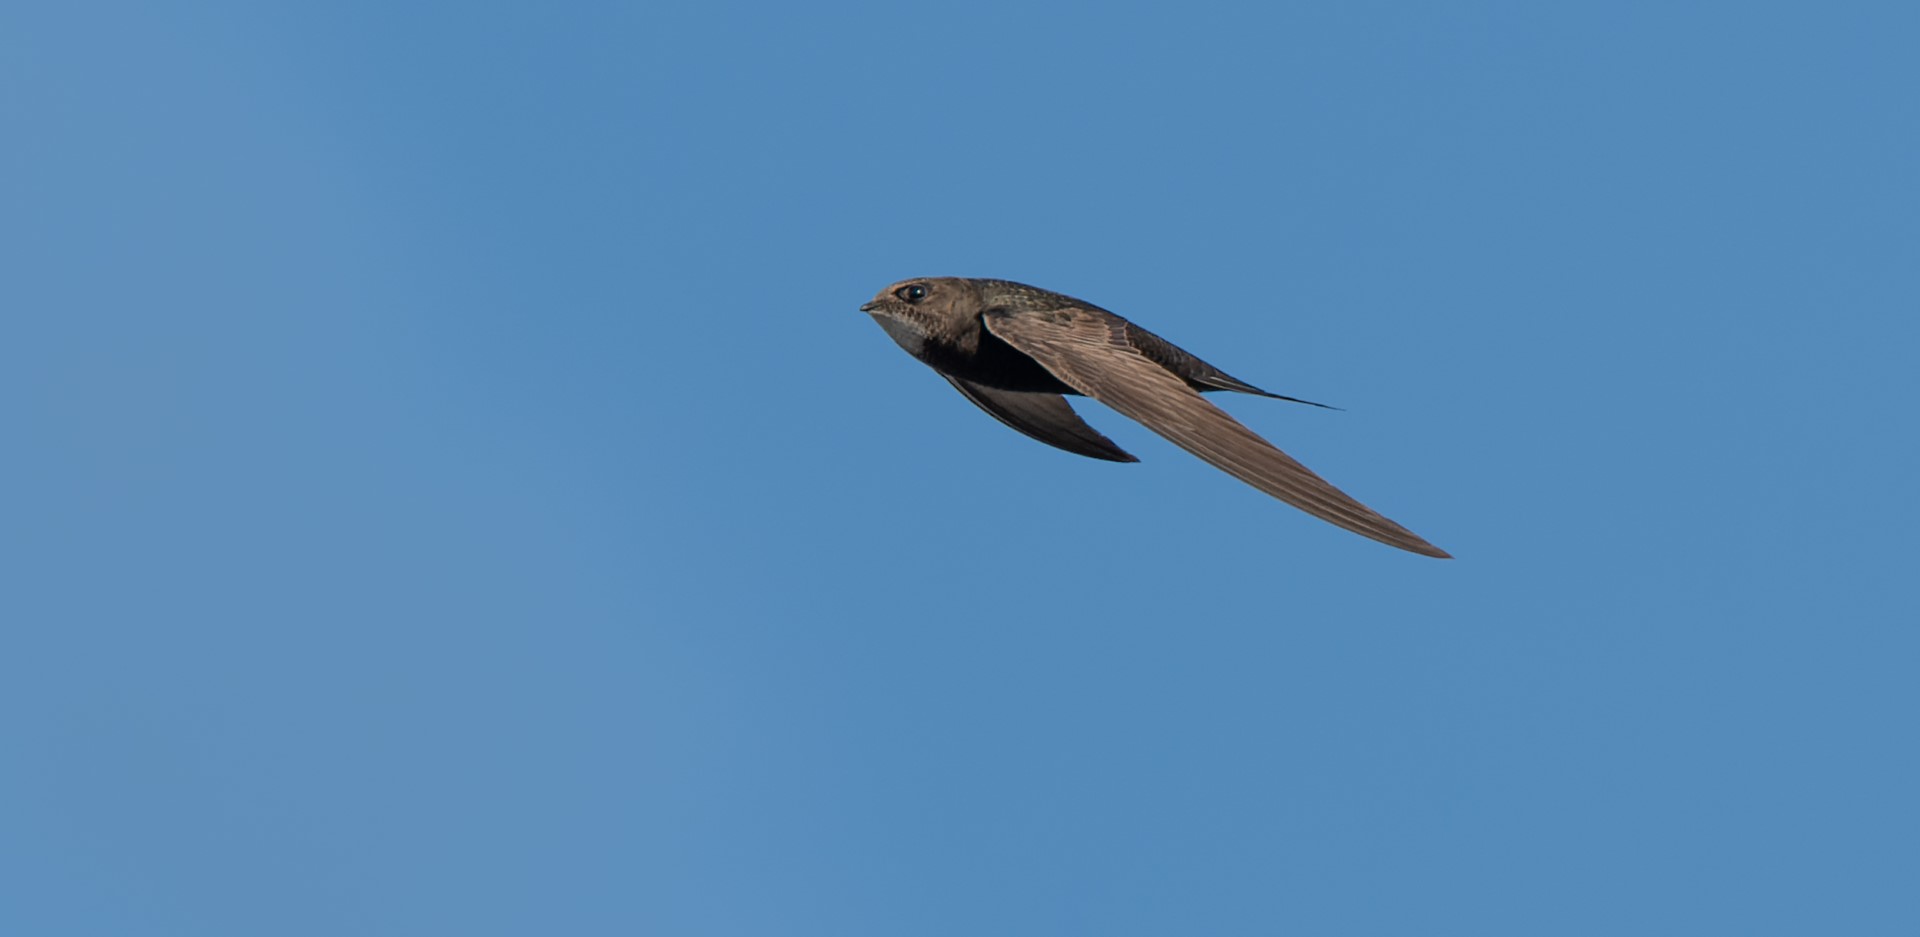 A swift. Picture by: Photos by Brenda Sheridan for Trinity College Dublin.